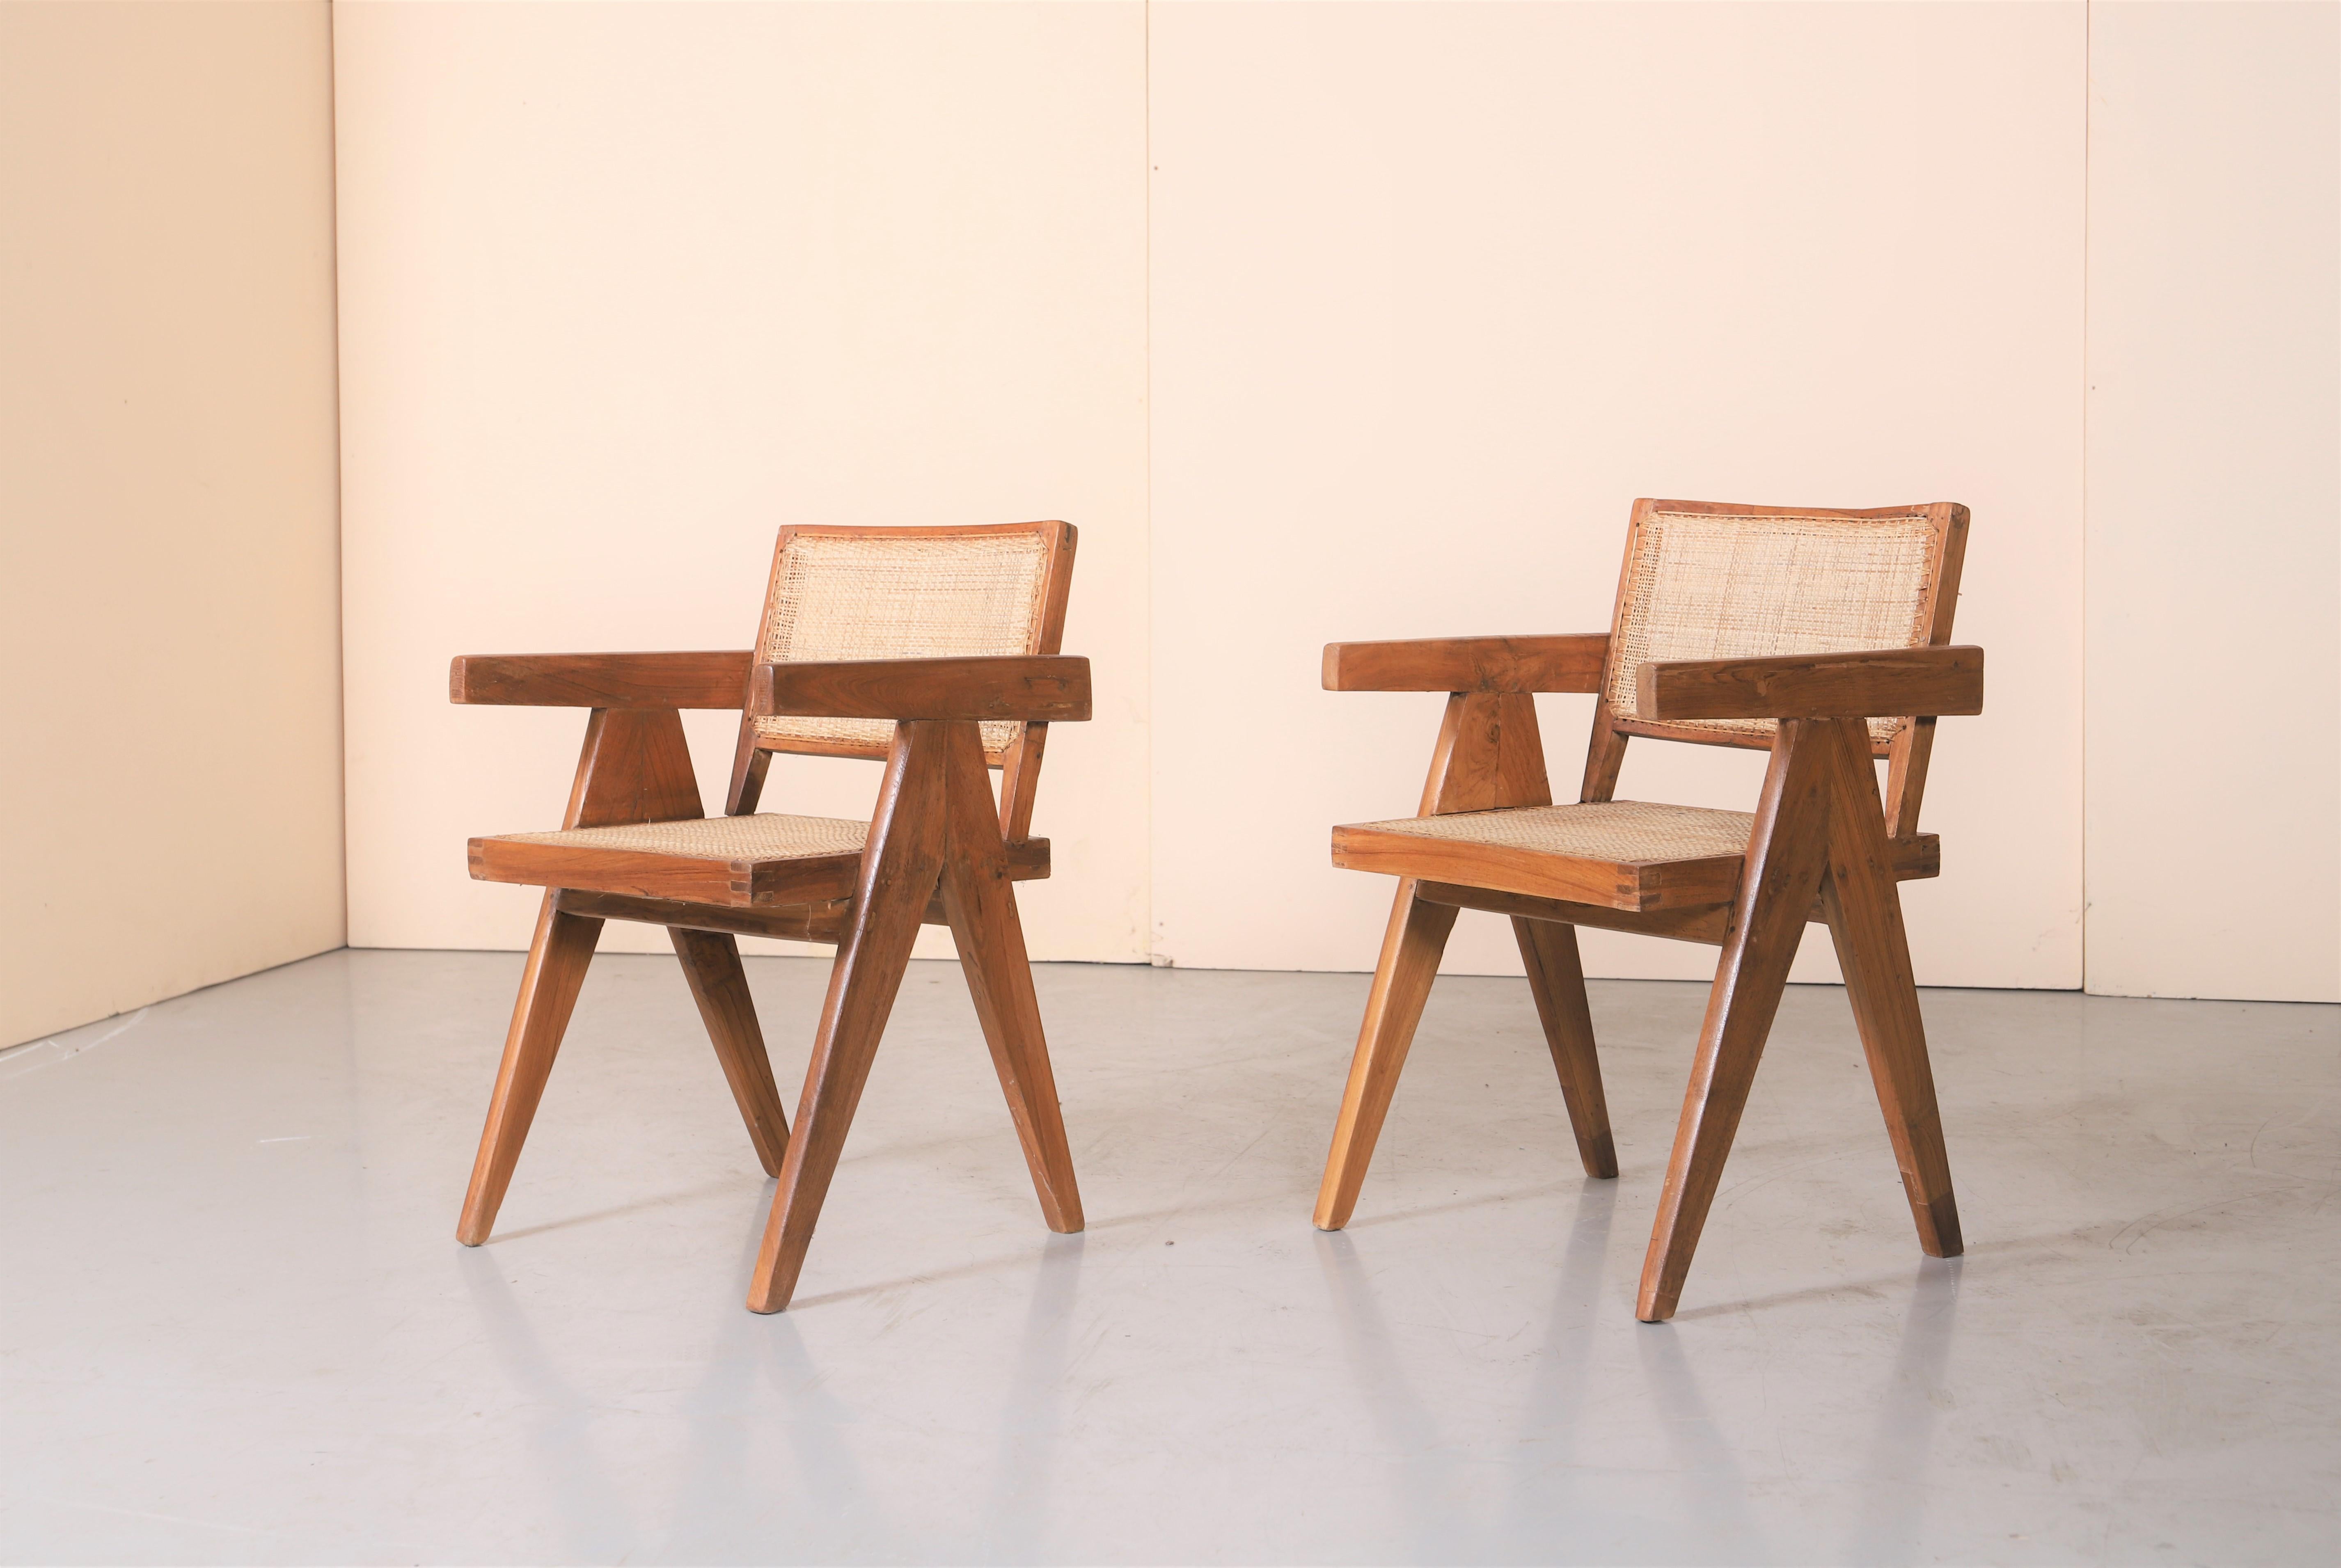 Pierre Jeanneret (1896-1967).

Set of two armchairs called 